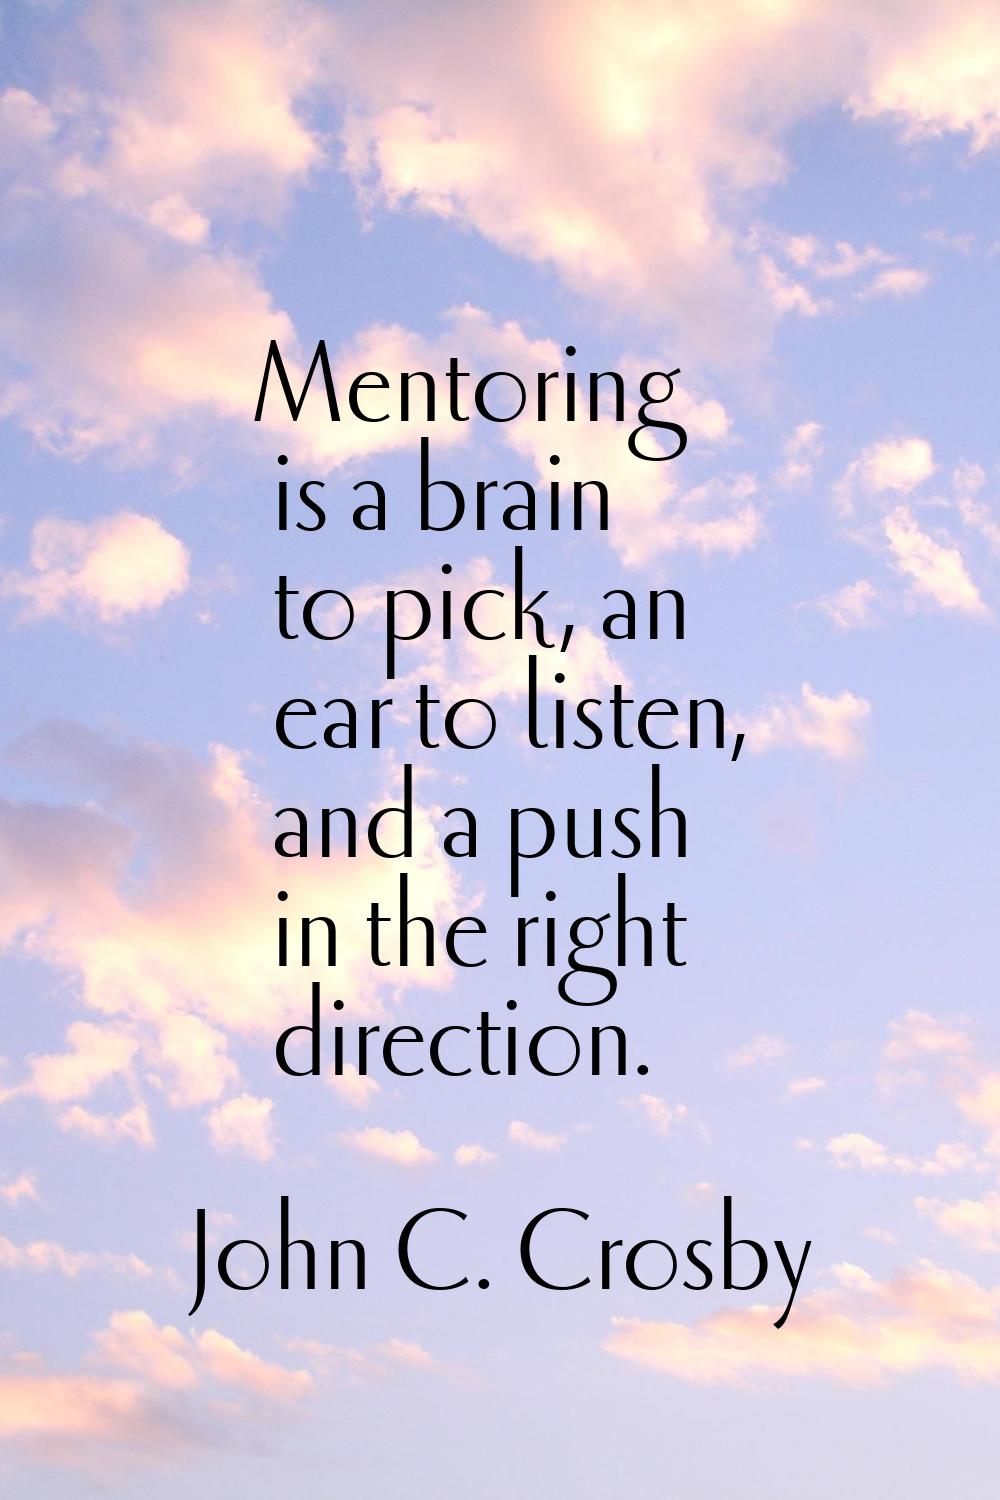 Mentoring is a brain to pick, an ear to listen, and a push in the right direction.